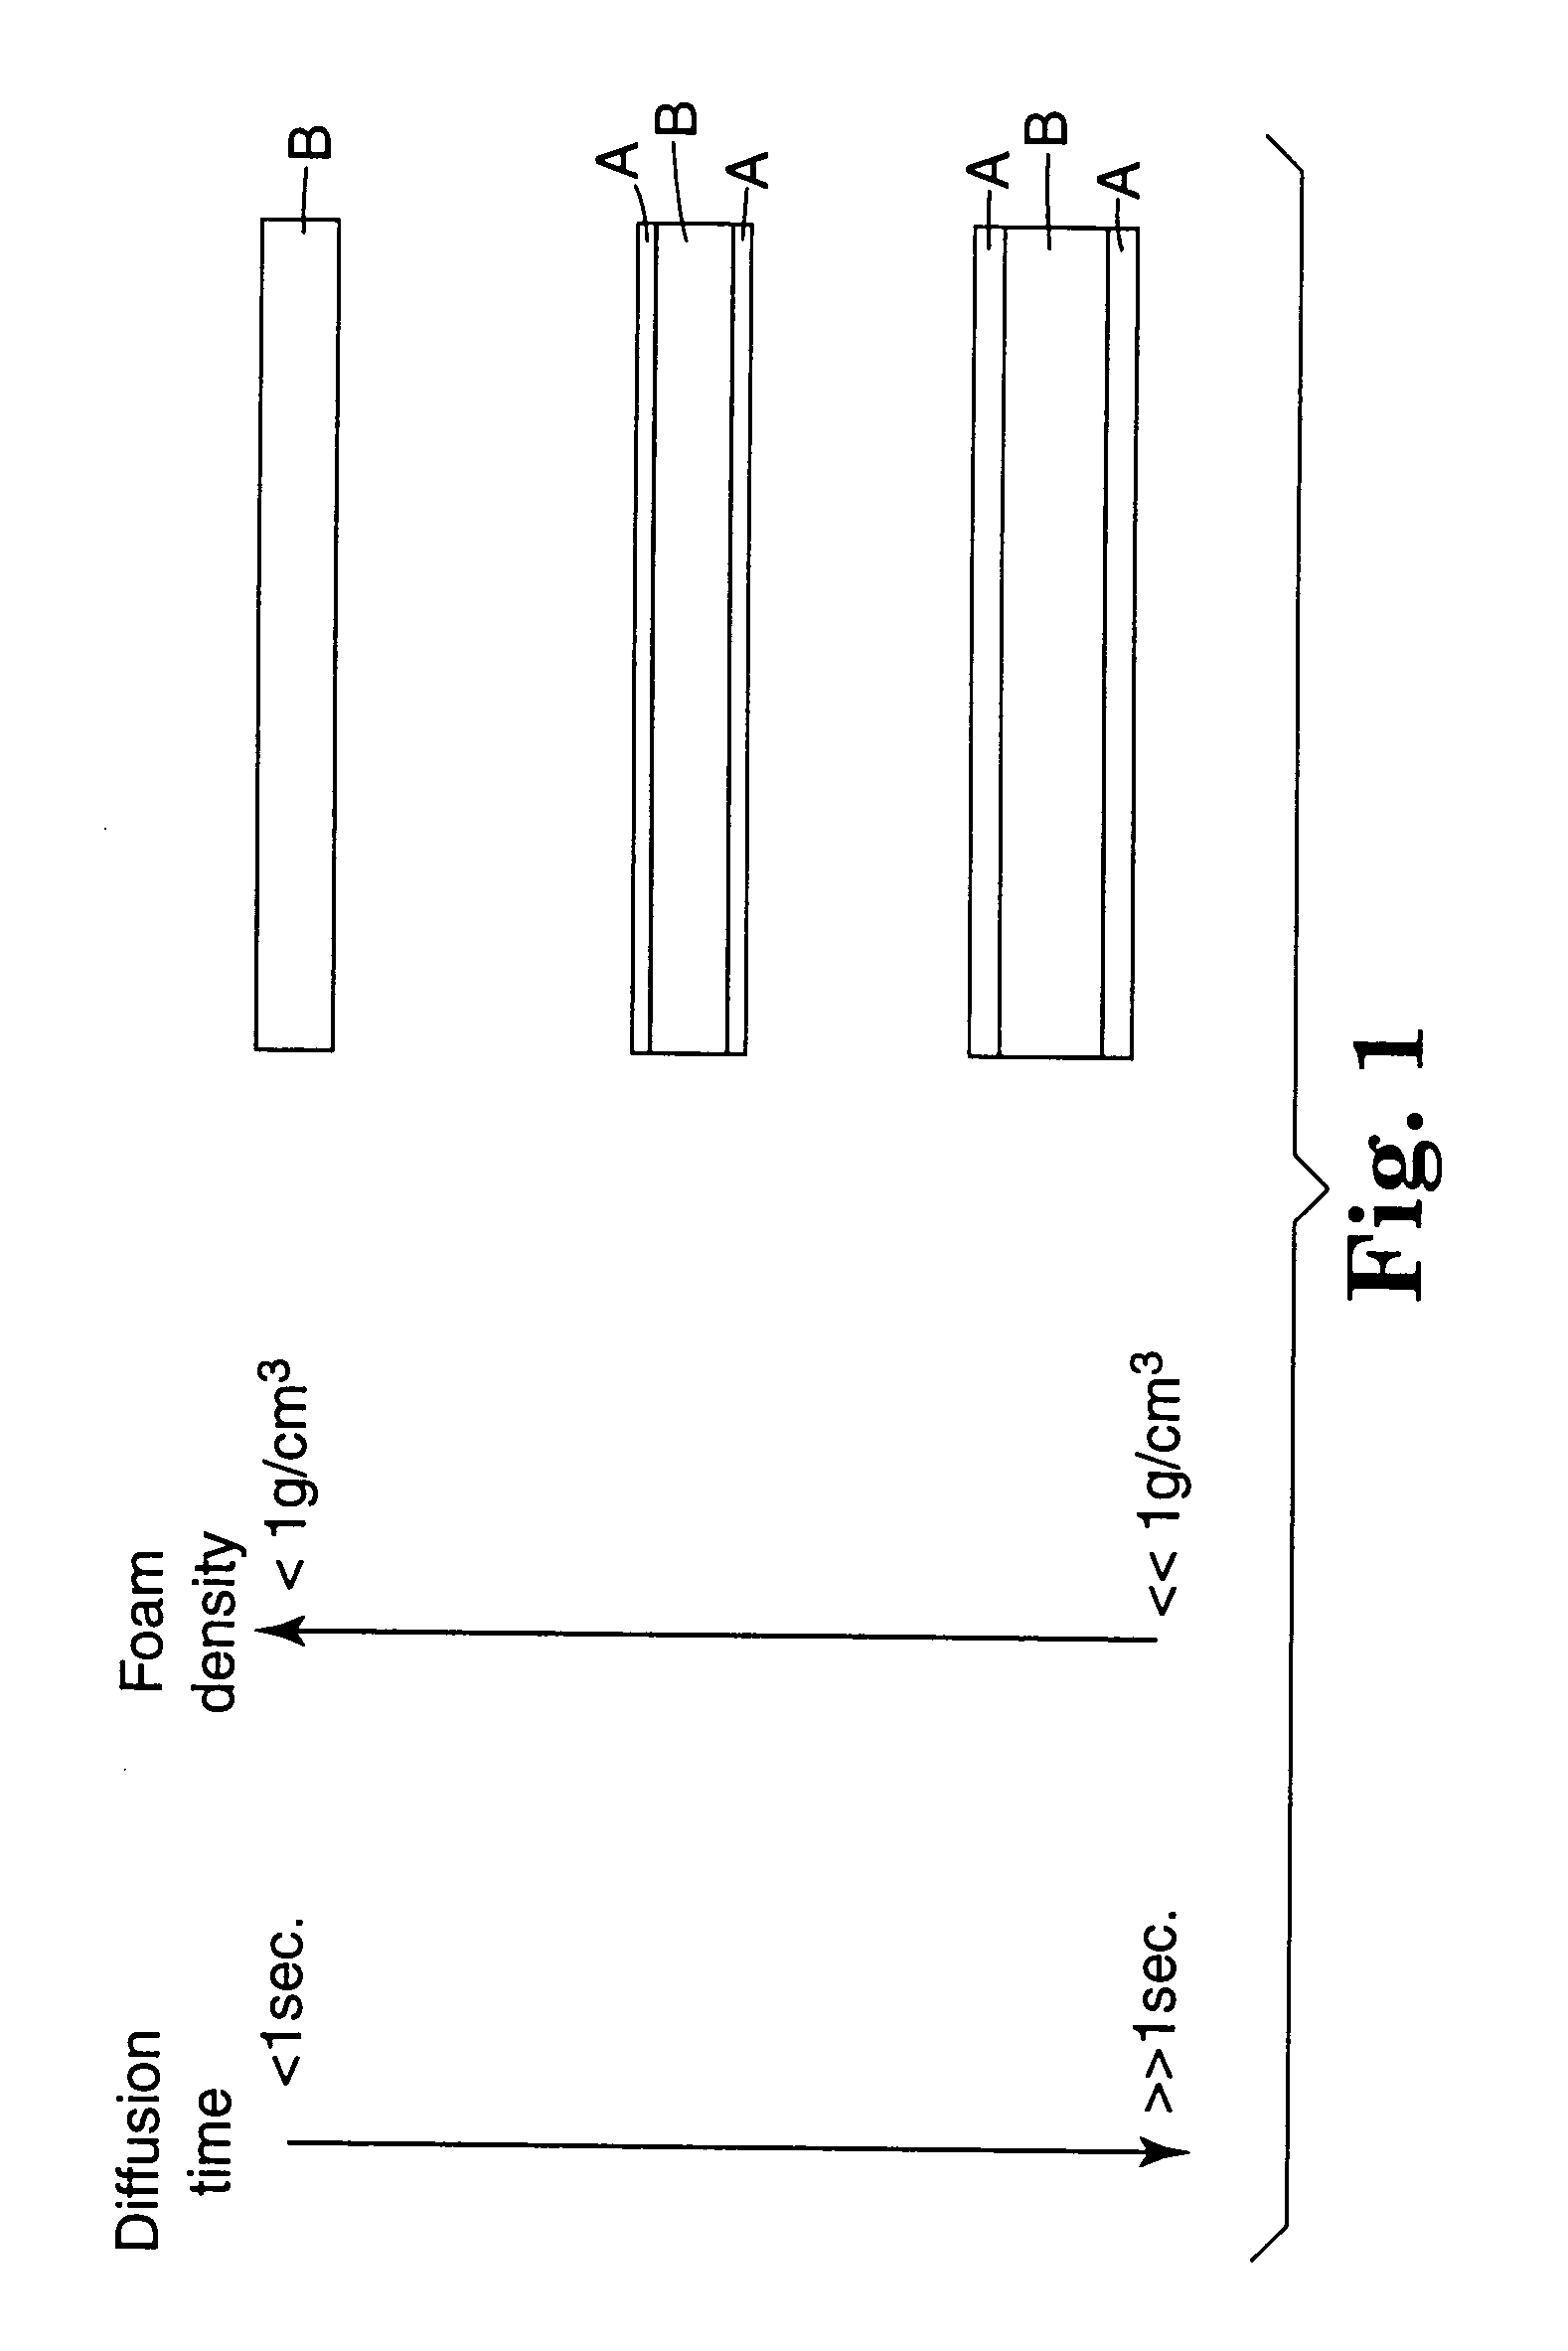 Reduced density foam articles and process for making